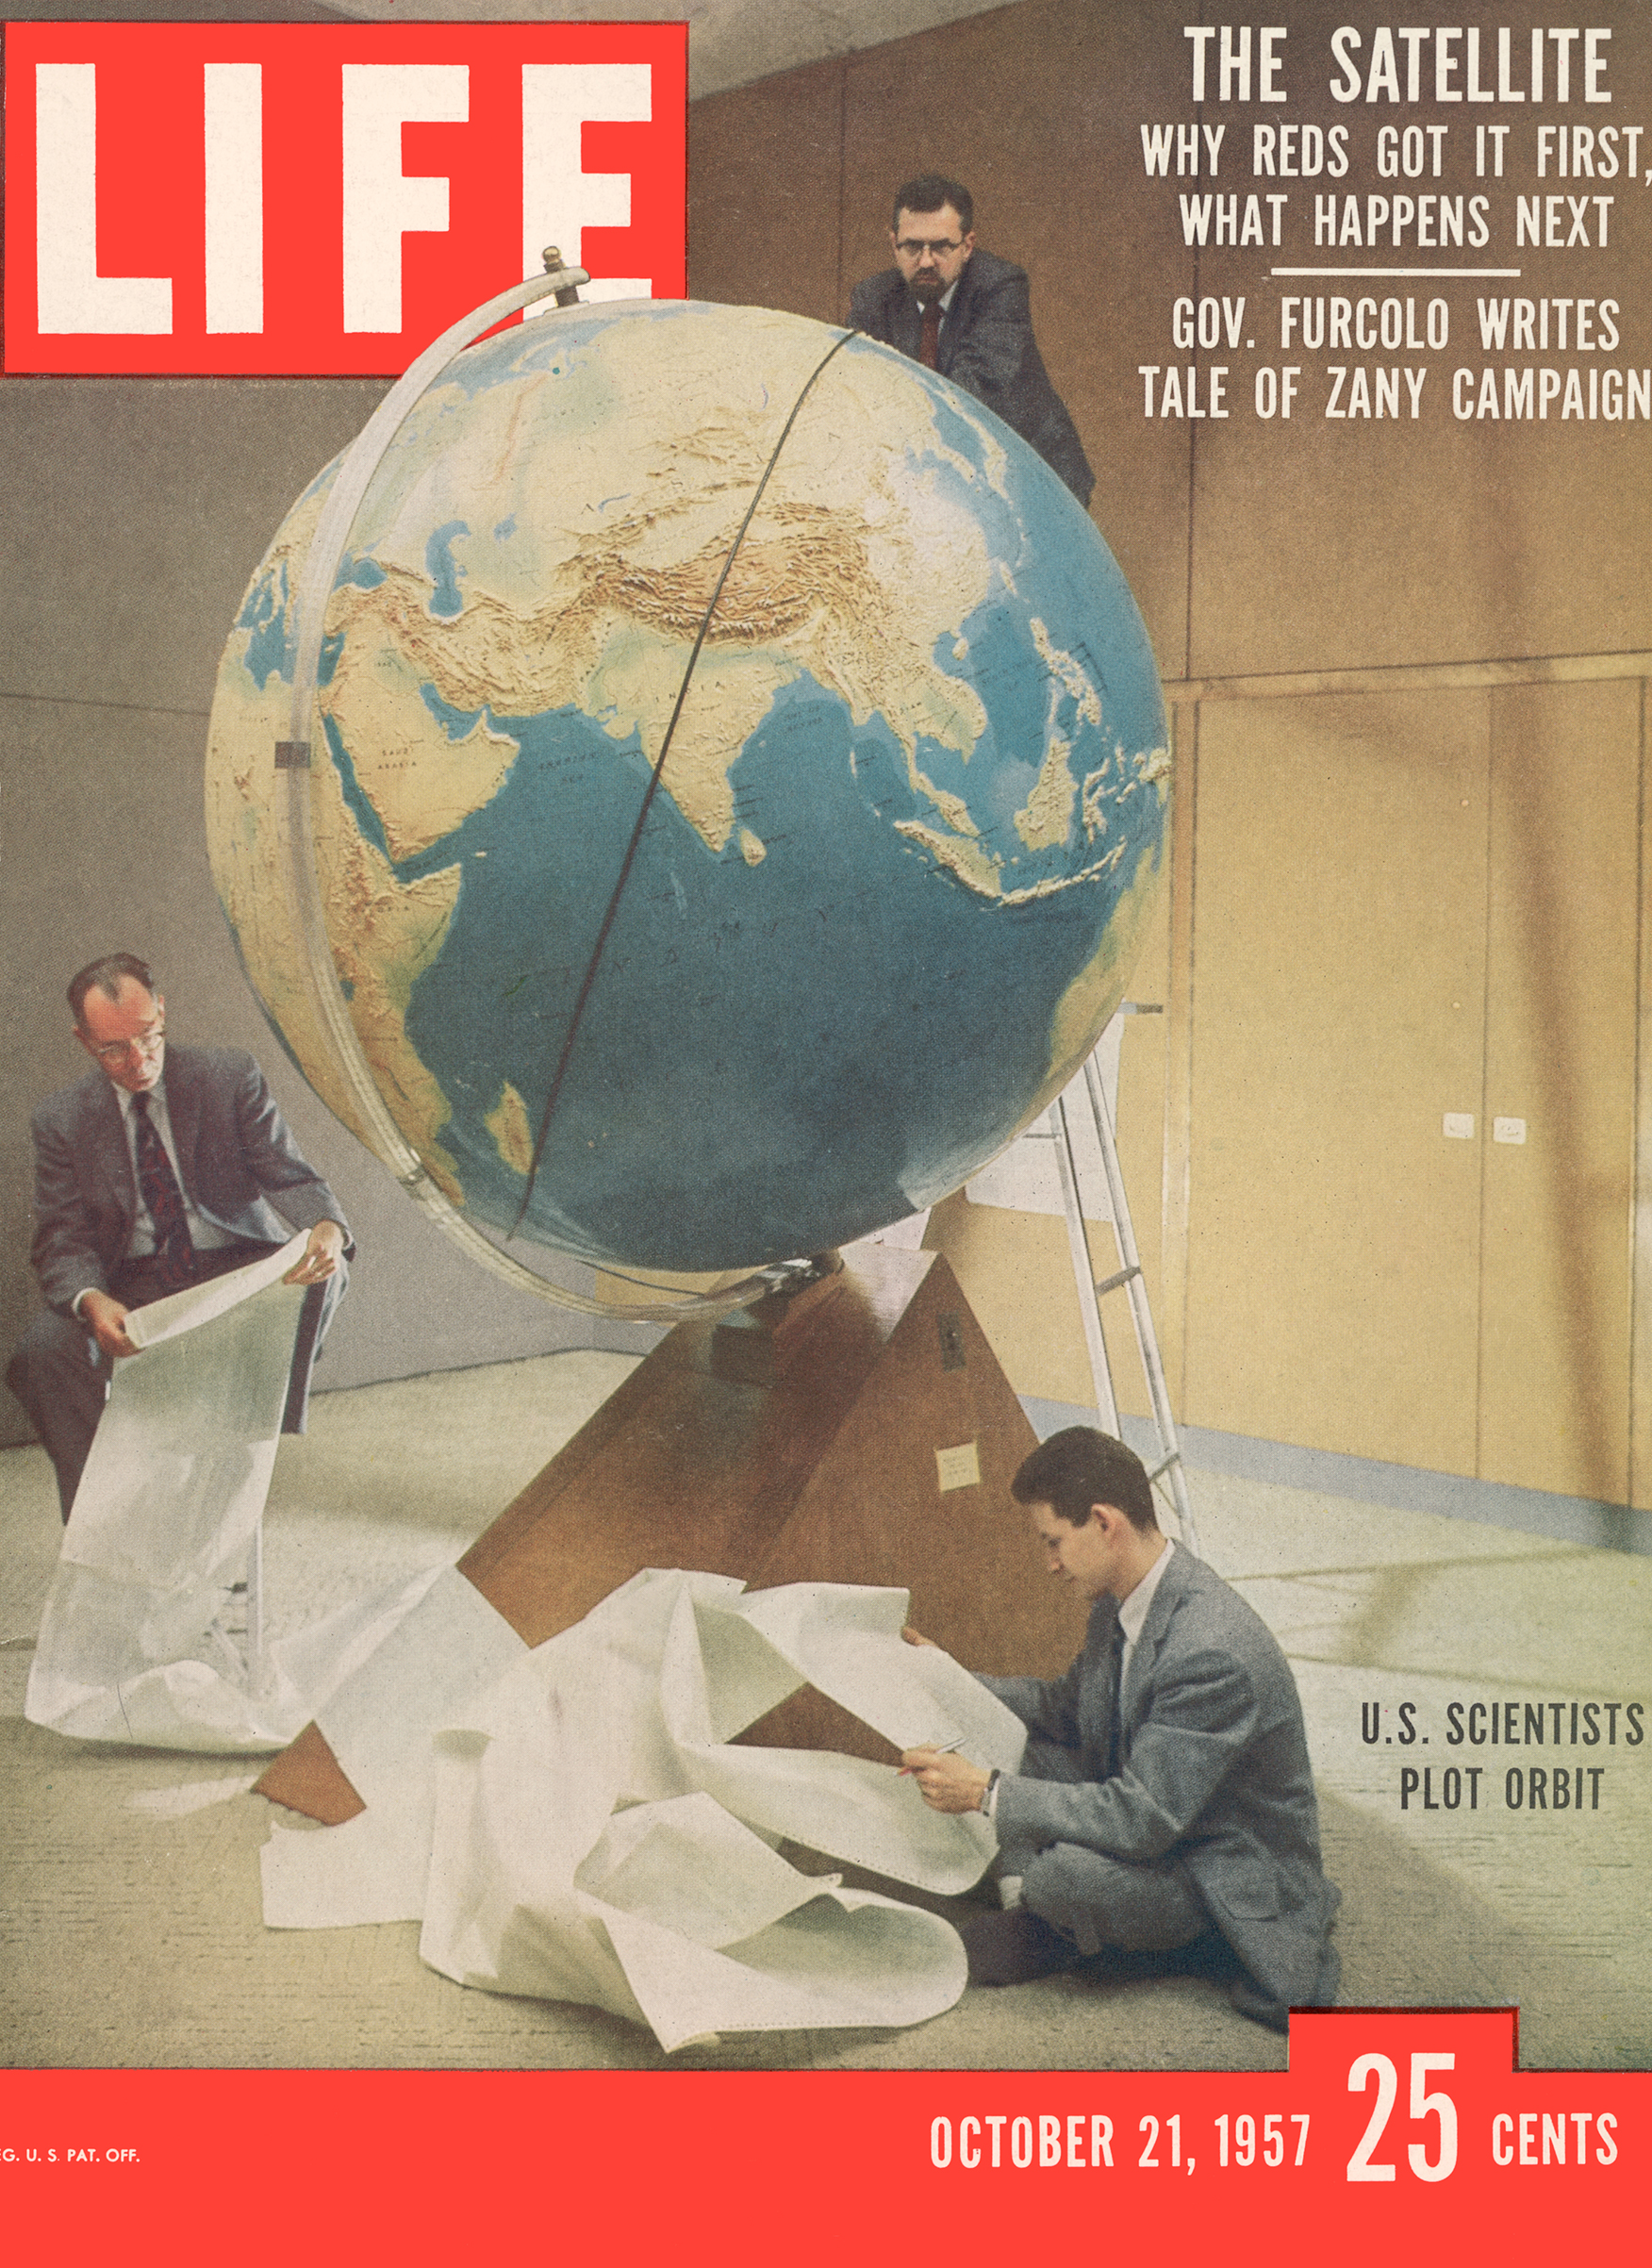 Oct. 21, 1957 cover of LIFE magazine featuring Smithsonian Observatory scientists working at M.I.T. in Cambridge to try to calculate Sputnik's orbit.